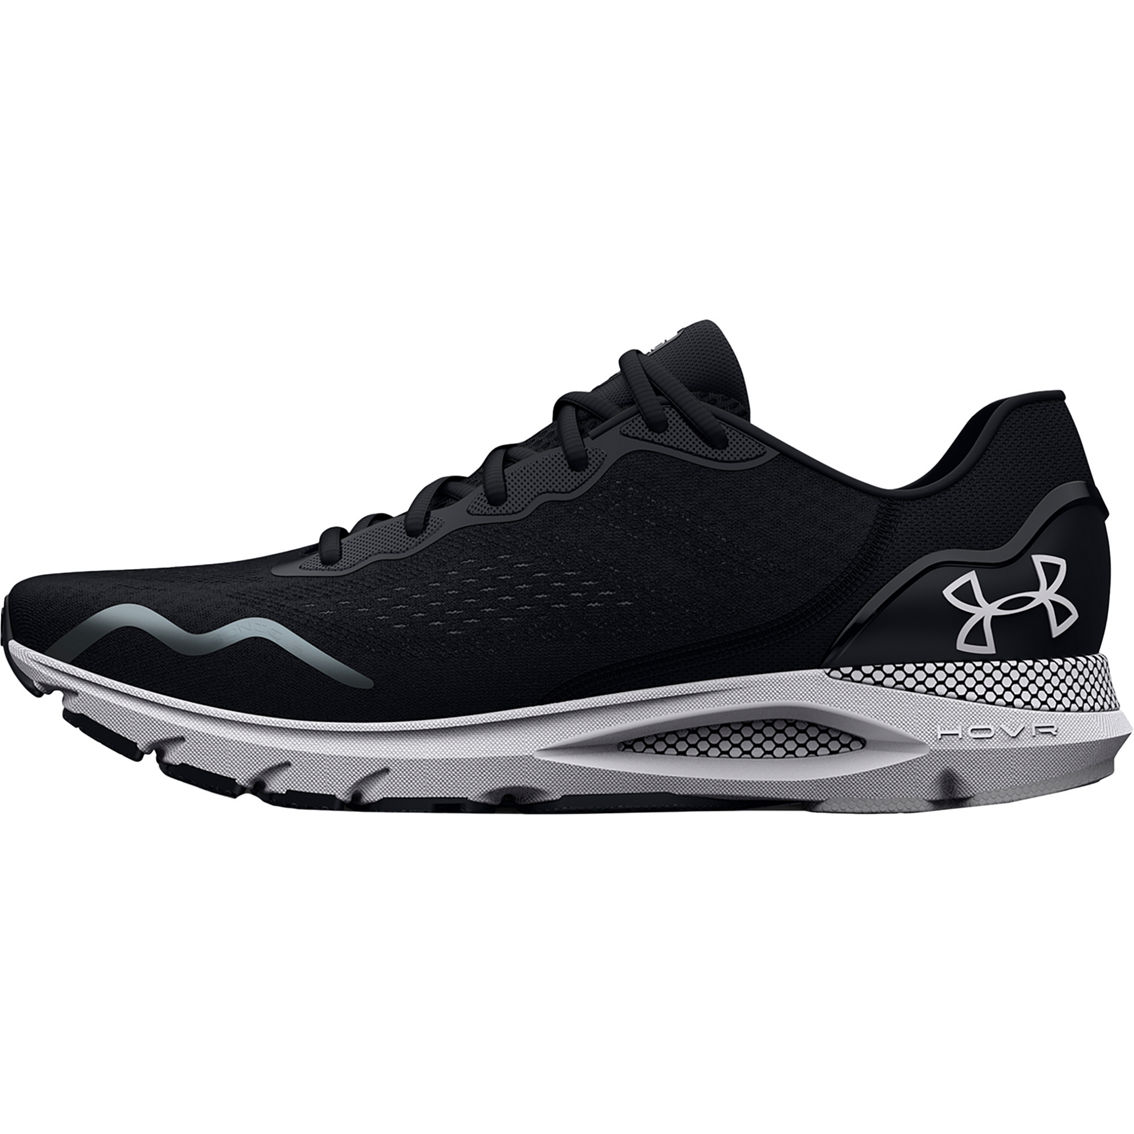 Under Armour Women's HOVR Sonic 6 Running Shoes - Image 2 of 5